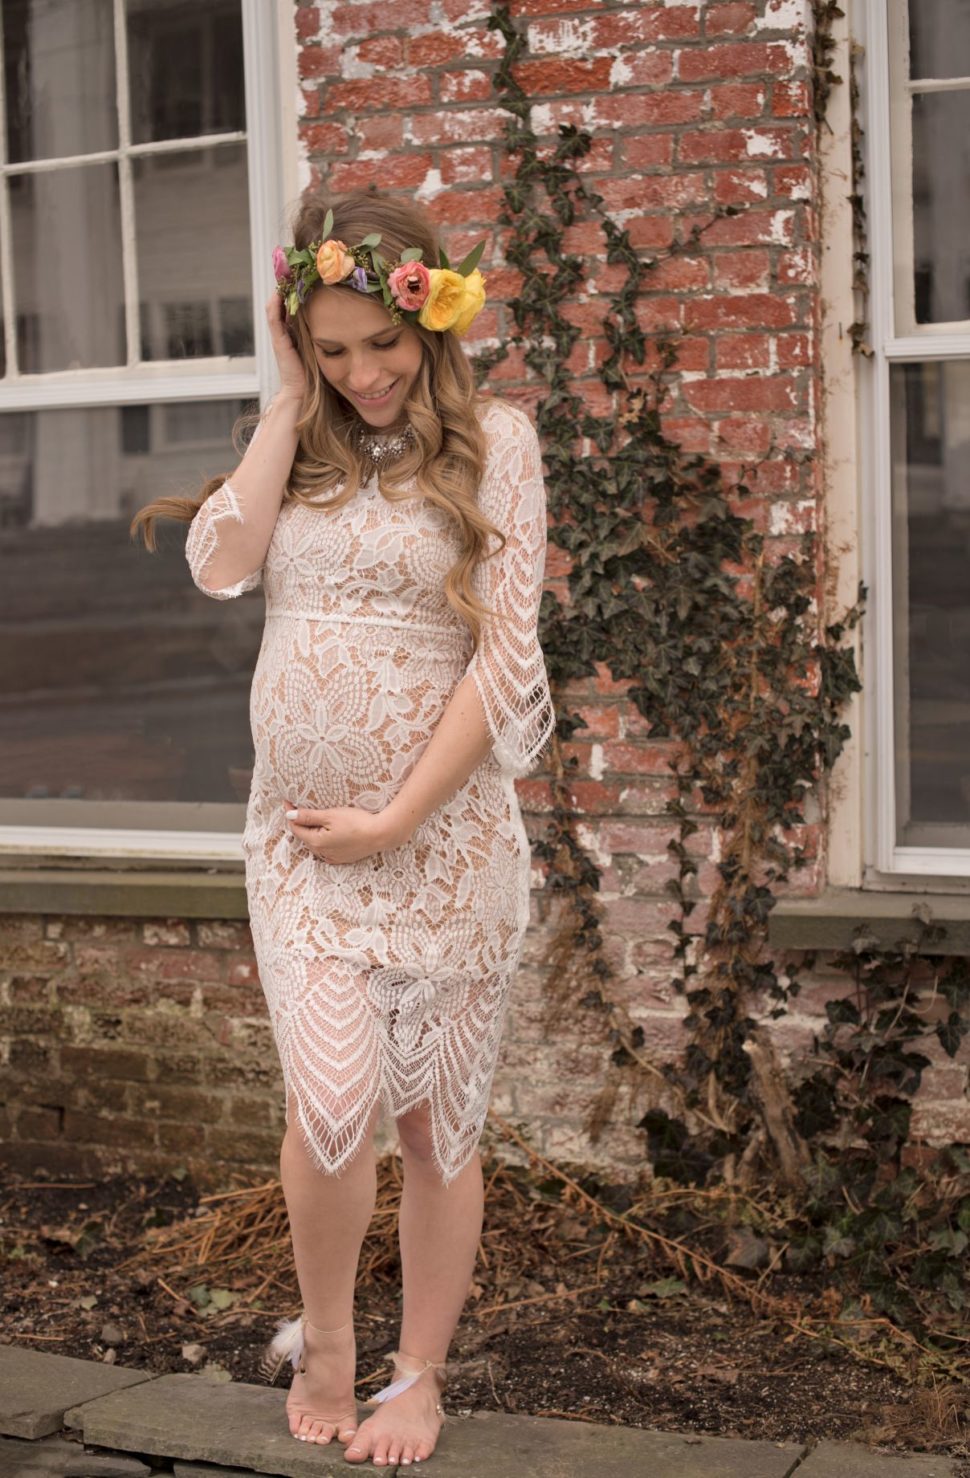 Medium Size of Baby Shower:baby Shower Dresses Trendy Affordable Maternity Clothes Inexpensive Maternity Clothes Maternity Dresses For Photoshoot Baby Shower Dresses Cute Inexpensive Maternity Clothes Maternity Evening Gowns Plus Size Maternity Dresses For Baby Shower